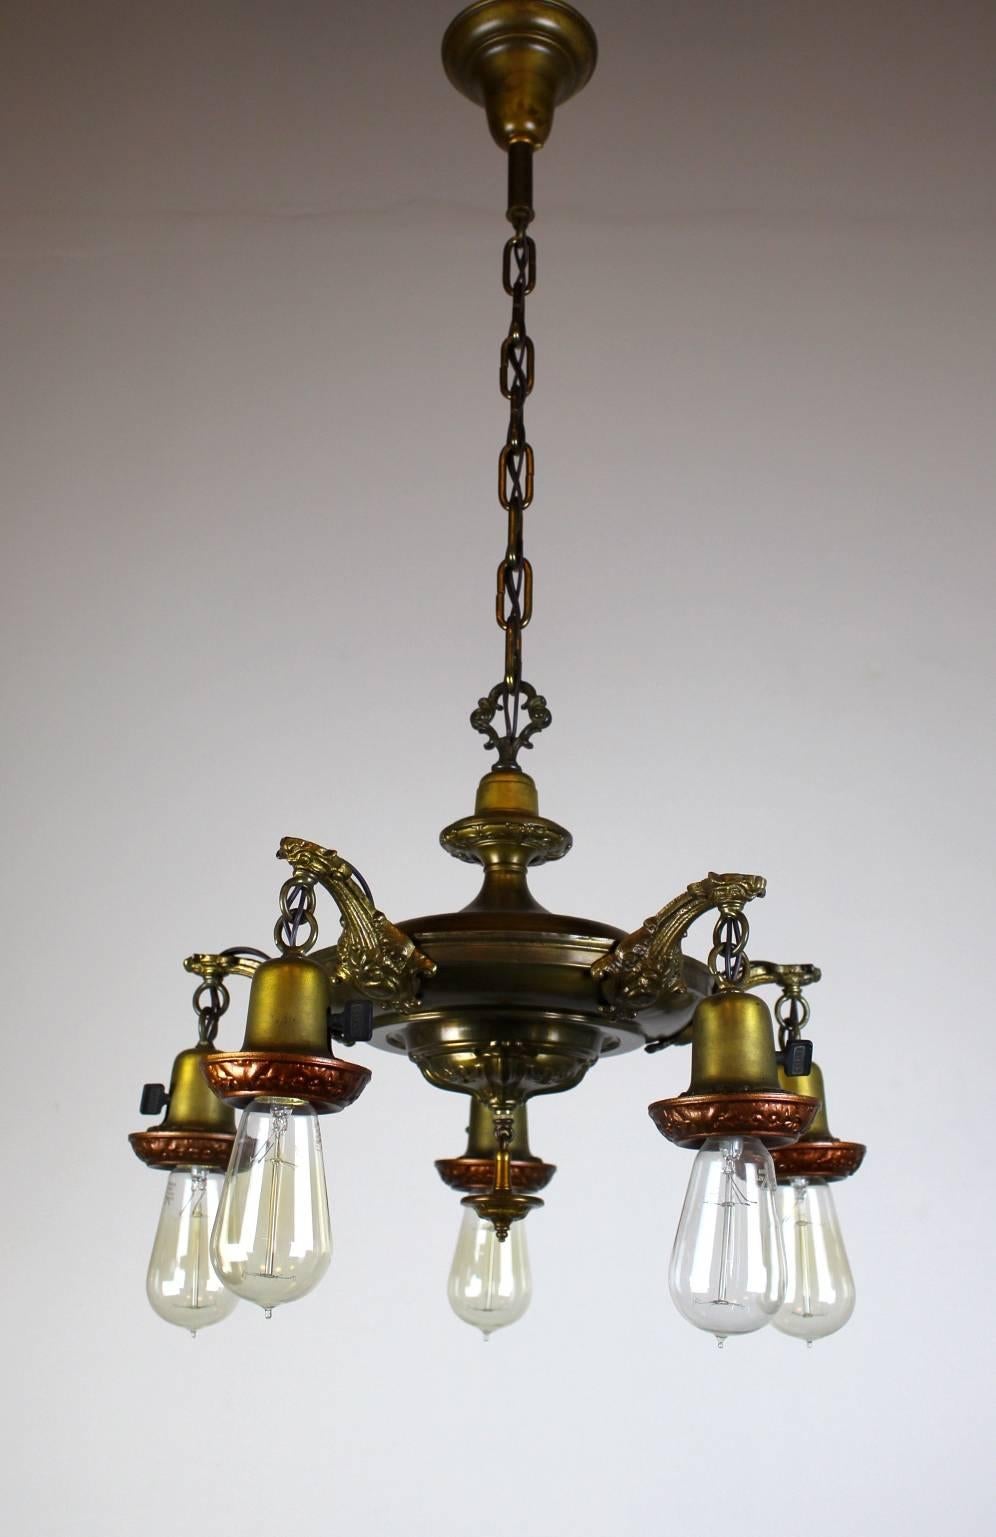 Five-Light Embossed Pan Fixture with Bare Bulbs For Sale 1